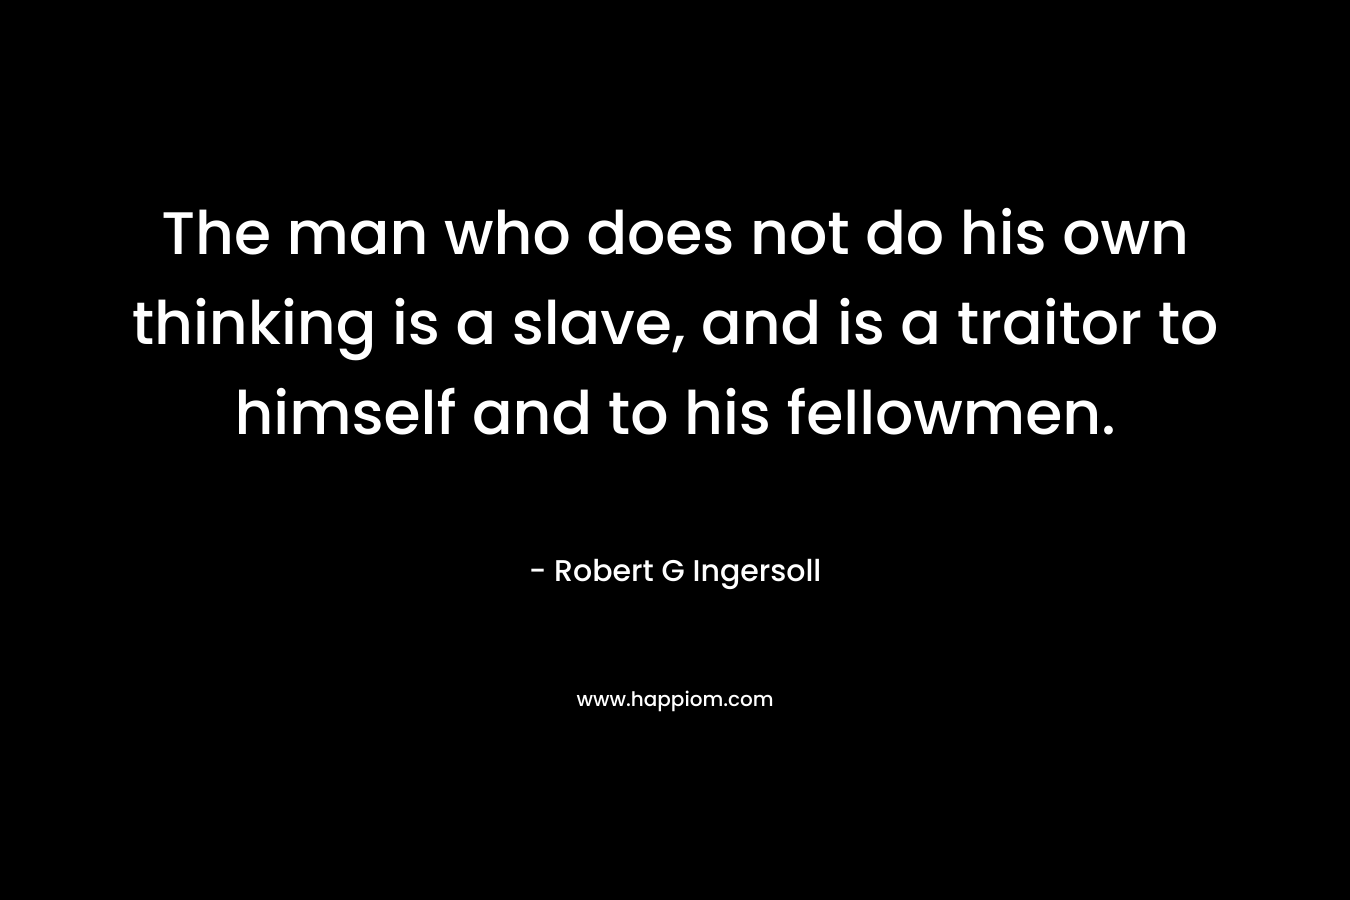 The man who does not do his own thinking is a slave, and is a traitor to himself and to his fellowmen.